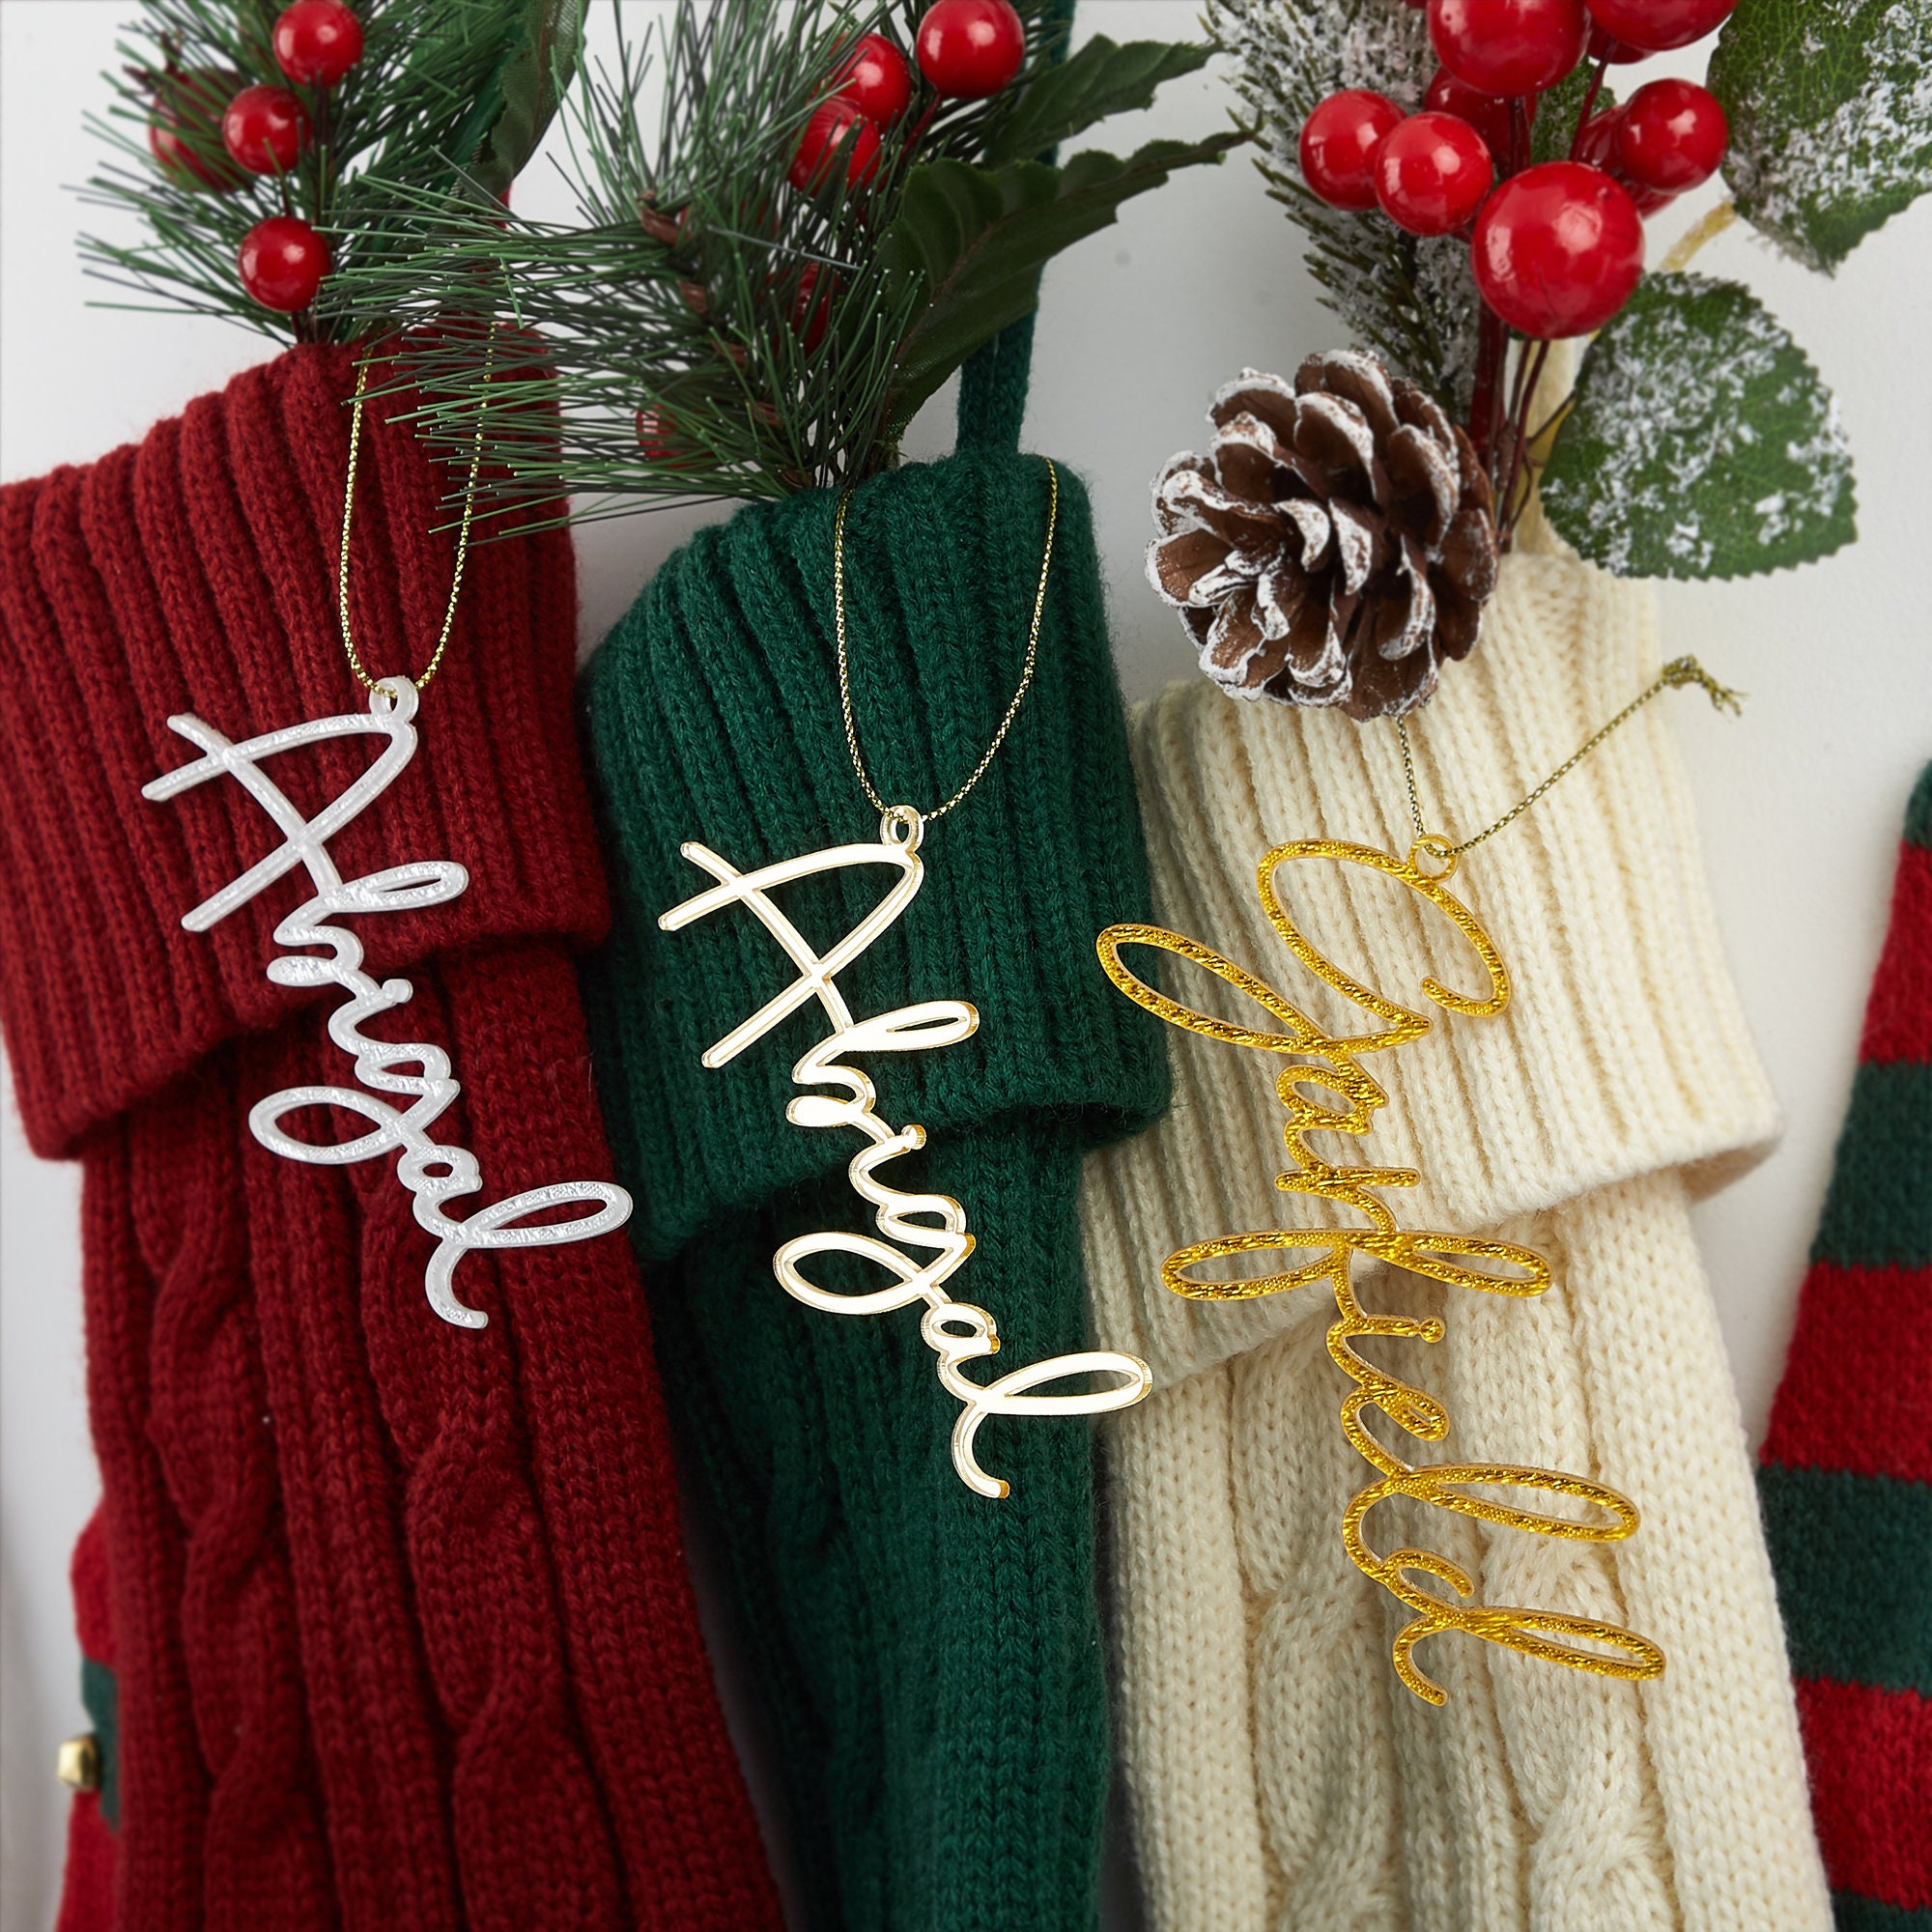 Script Gift/Stocking Name Tags – Heather and Oak